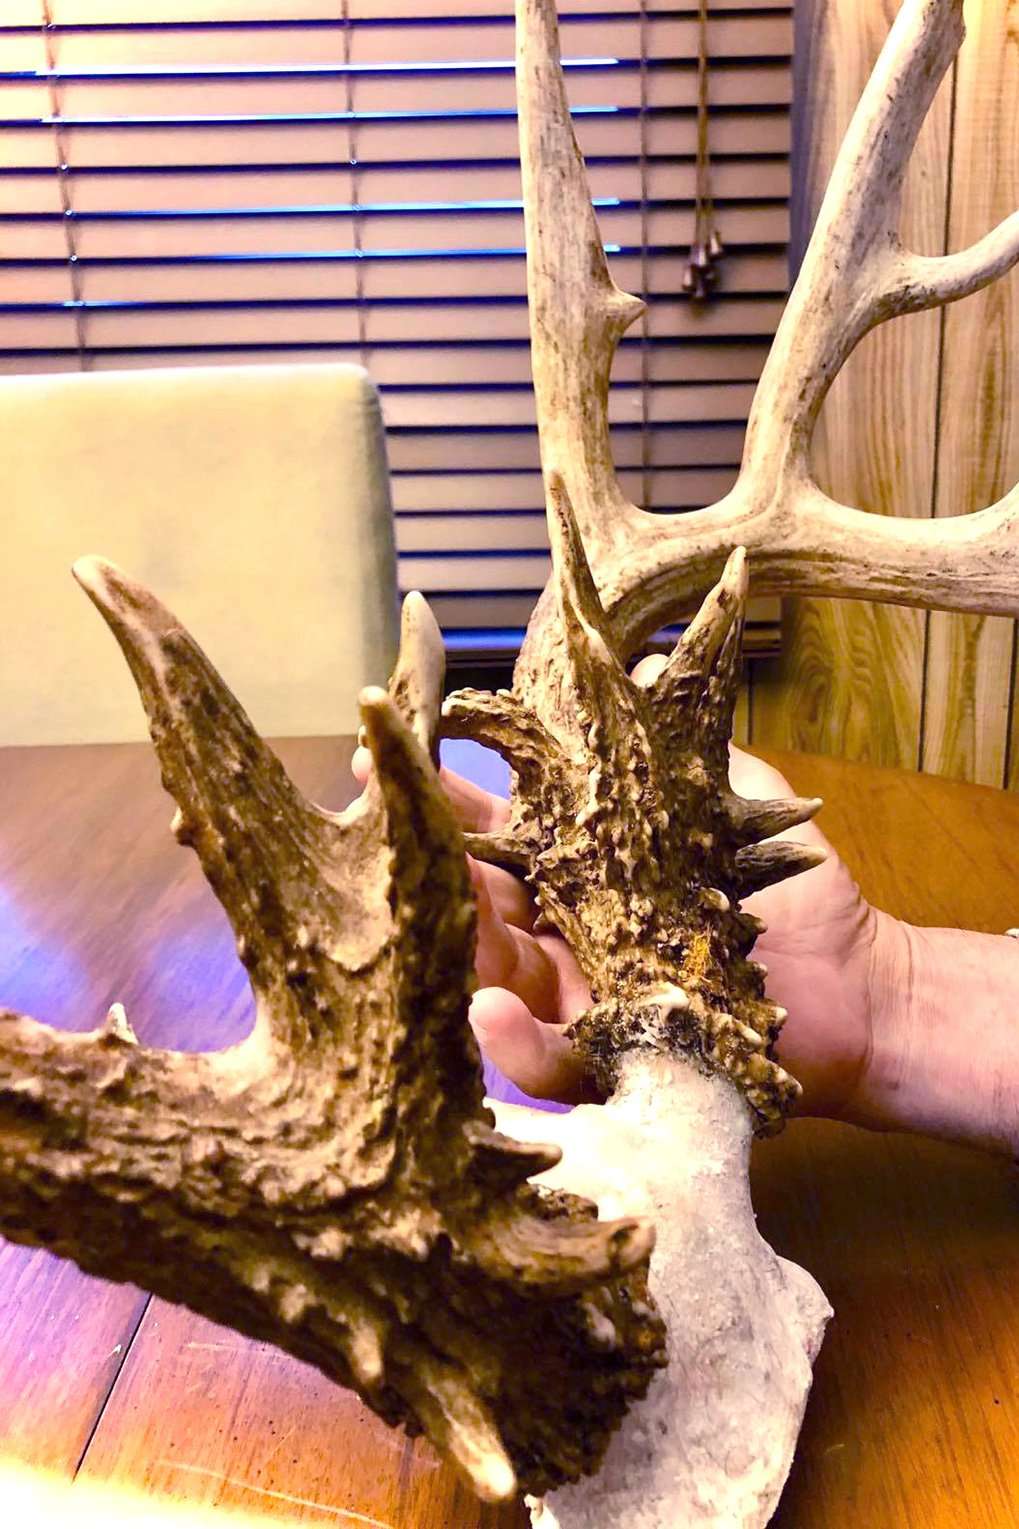 After many years of trying, Doug Hampton finally broke the 200-inch mark. This deer has it all, including incredible mass. Image by Doug Hampton